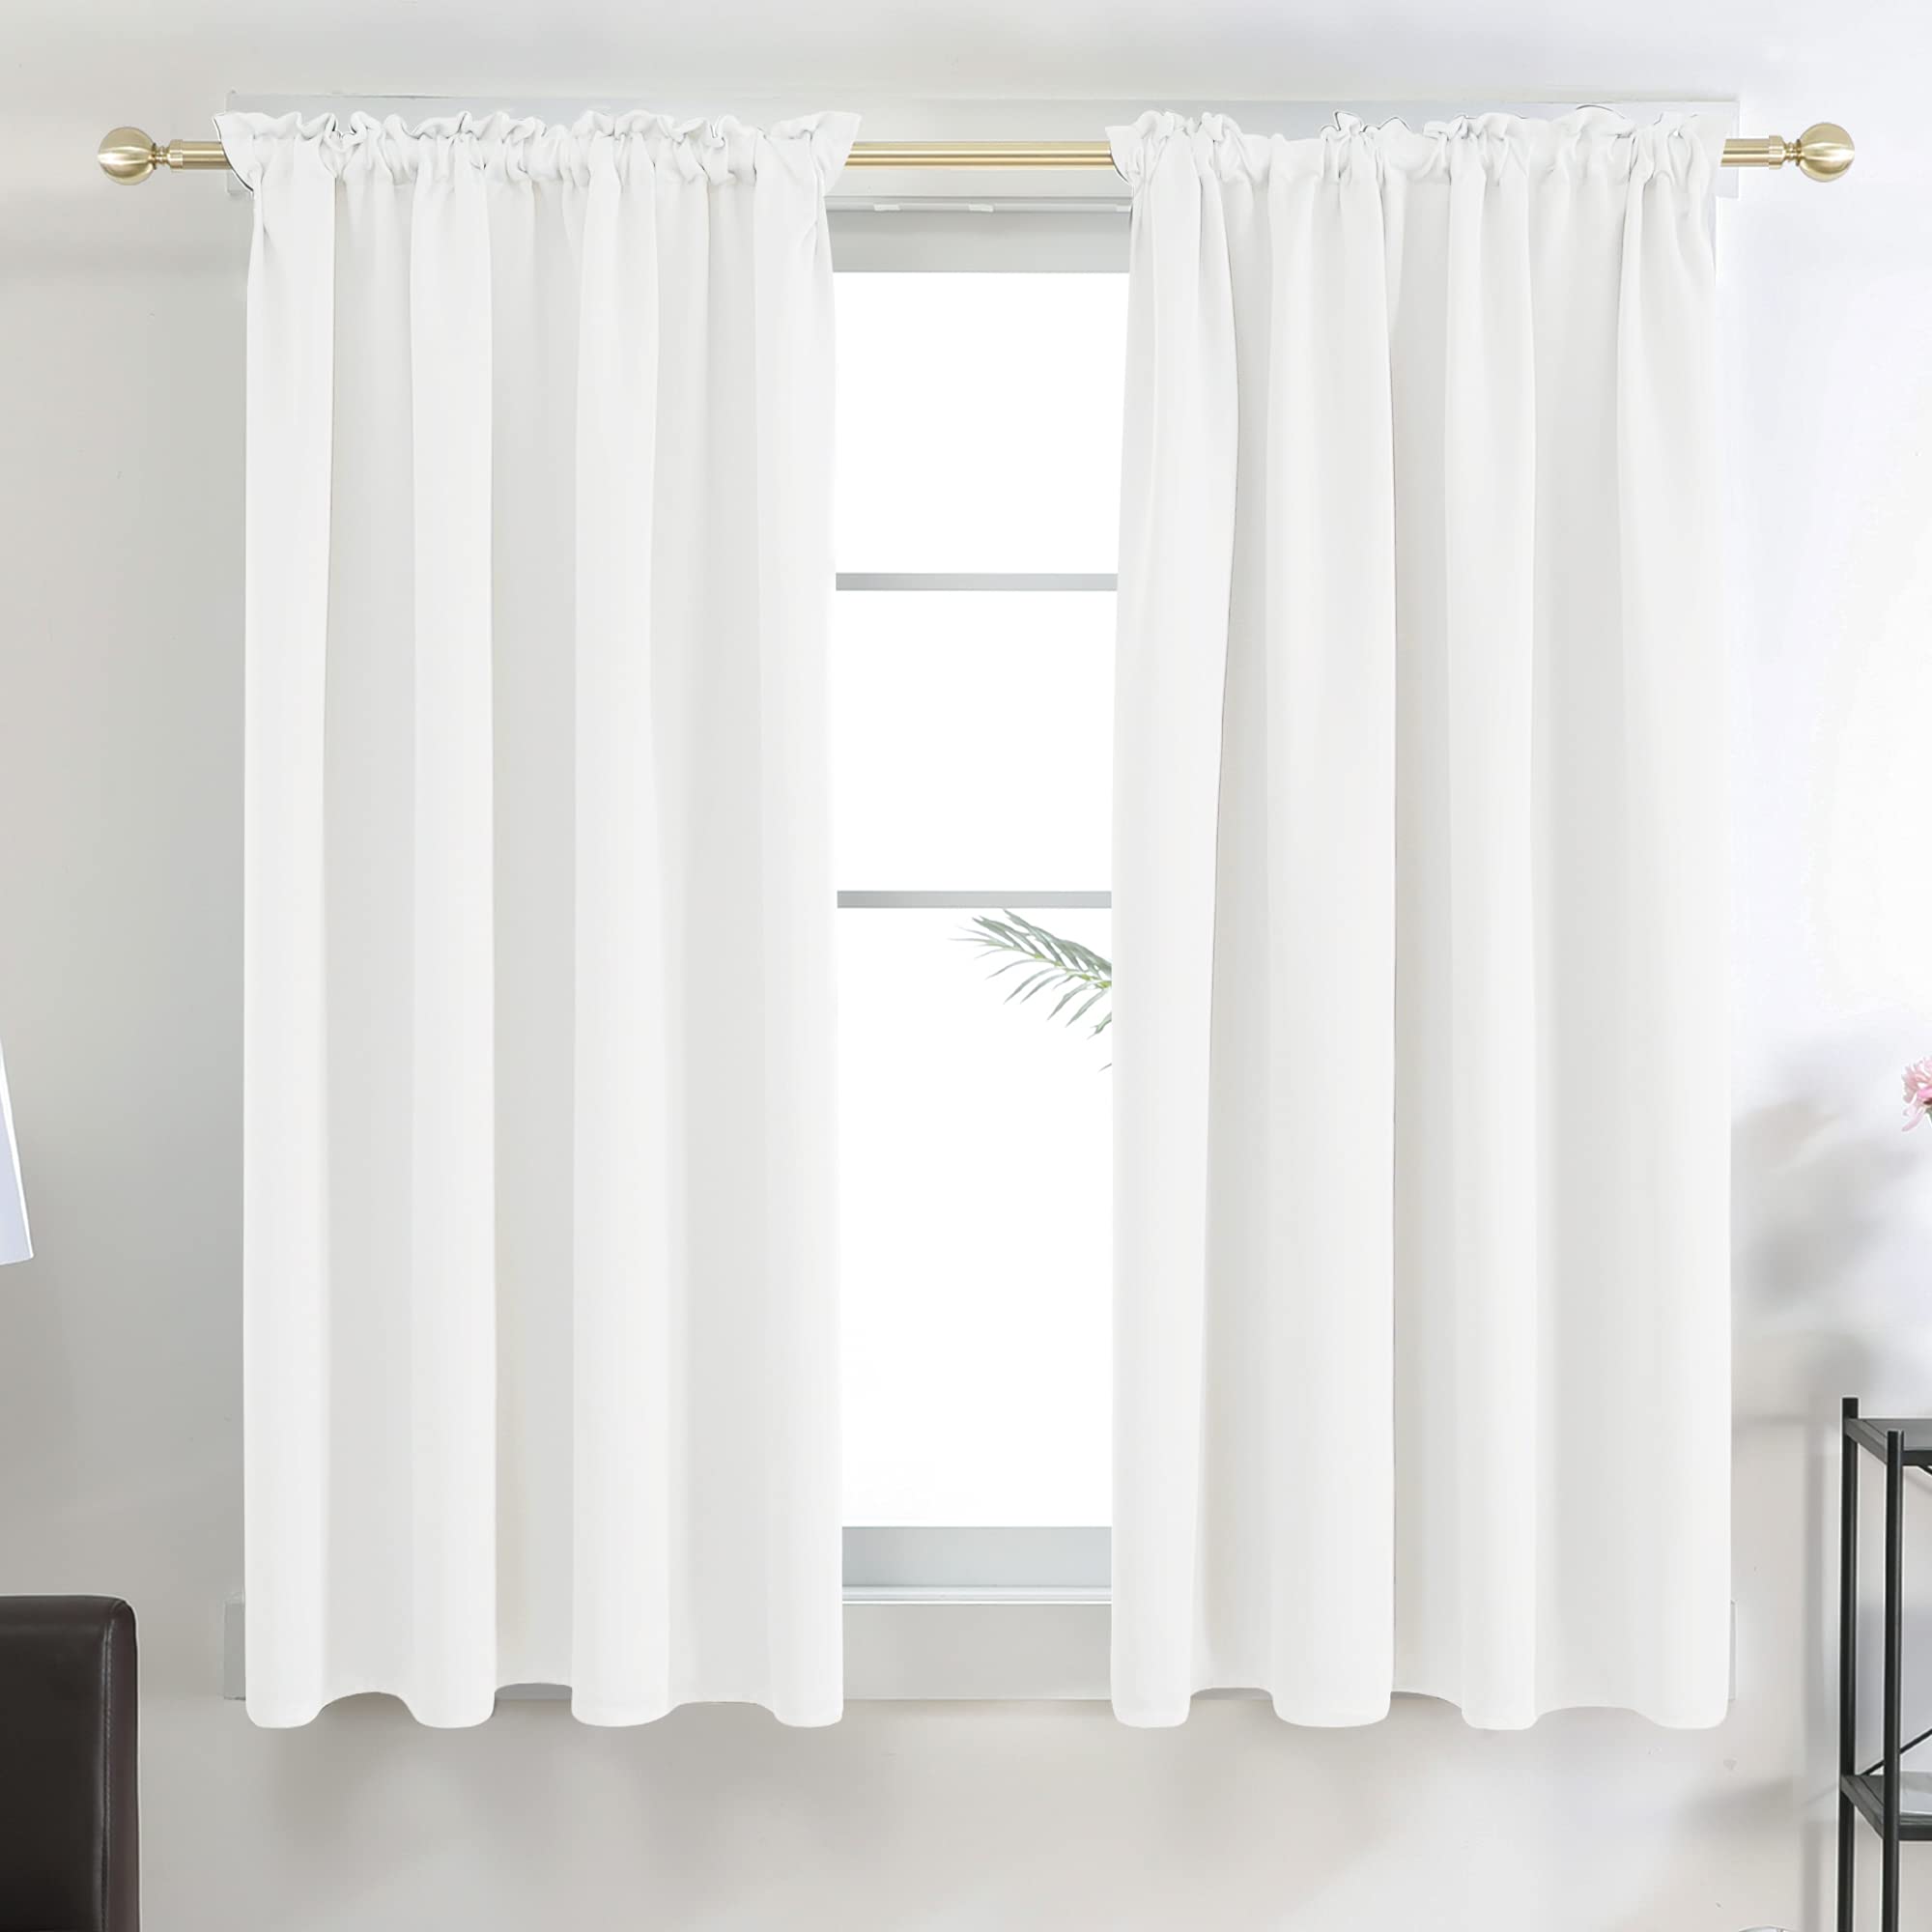 Deconovo Bedroom curtains and Drapes with Rod Pocket, 54 Inch Long, Small Window curtains, Noise Reducing for Bedroom - 42W x 54